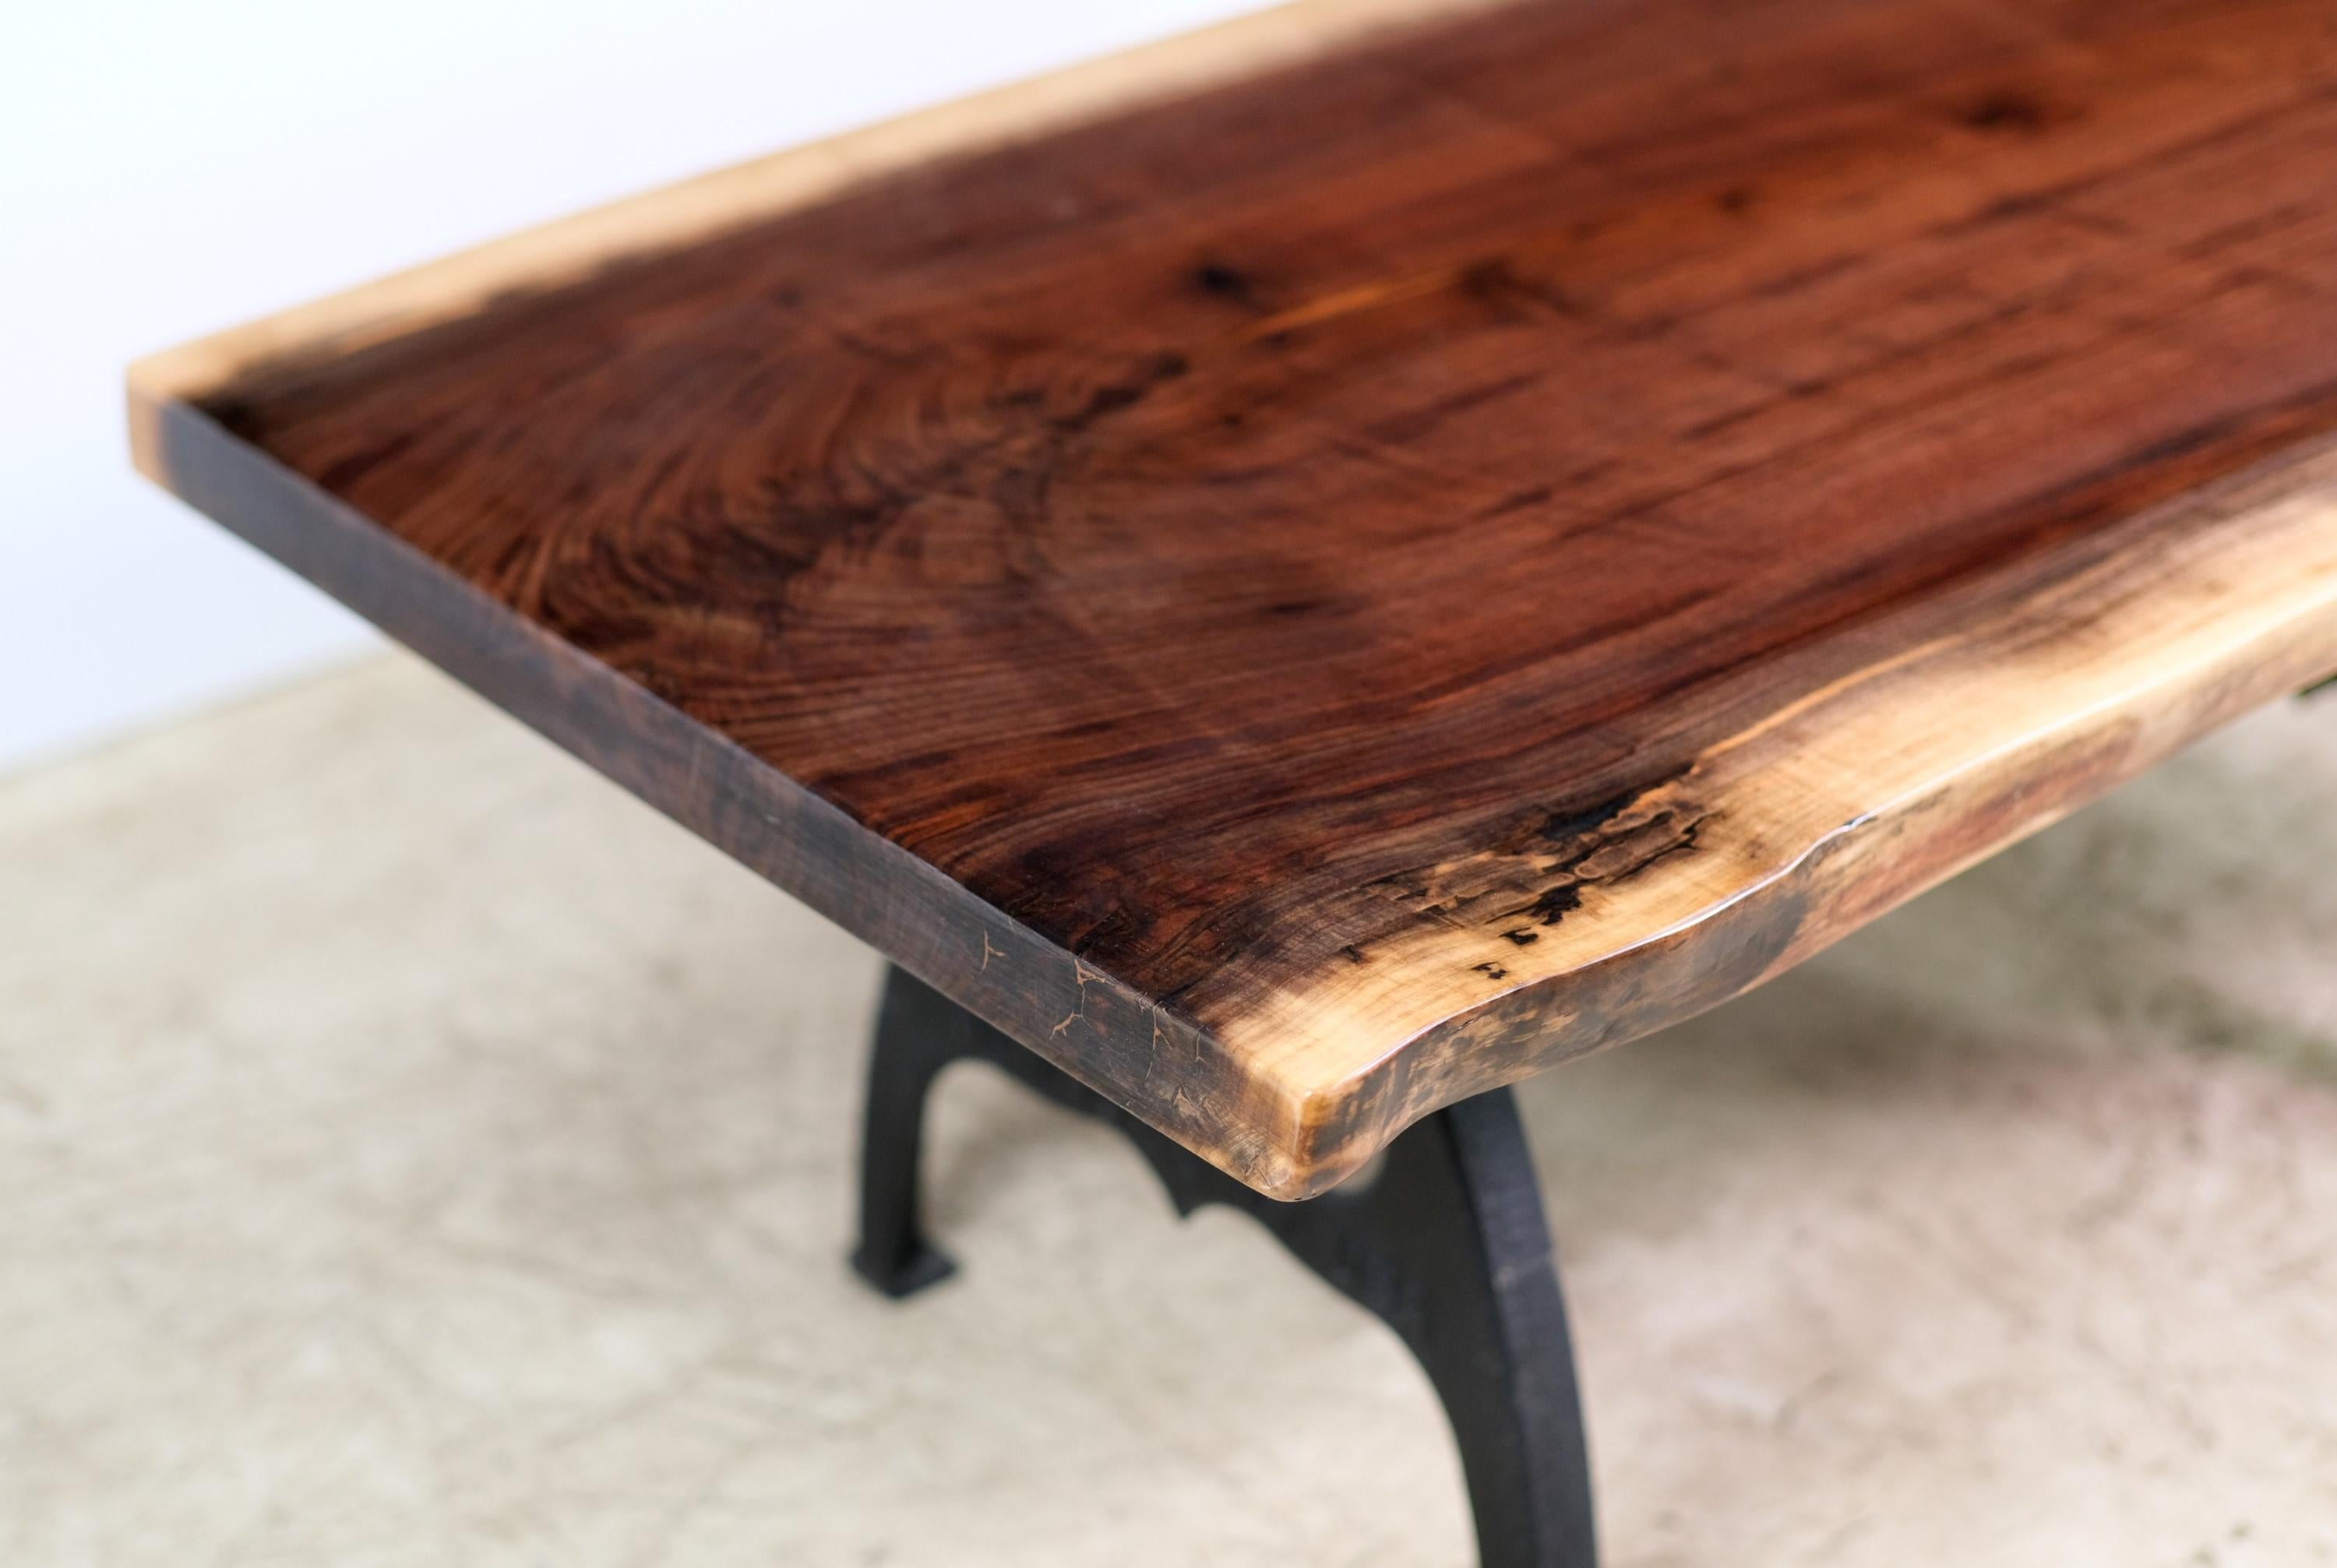 Hand made live edge table made out of a single piece of reclaimed walnut. Comes complete with a pair of Industrial style cast iron legs. This can be seen at our 2420 Broadway location on the upper west side in Manhattan.